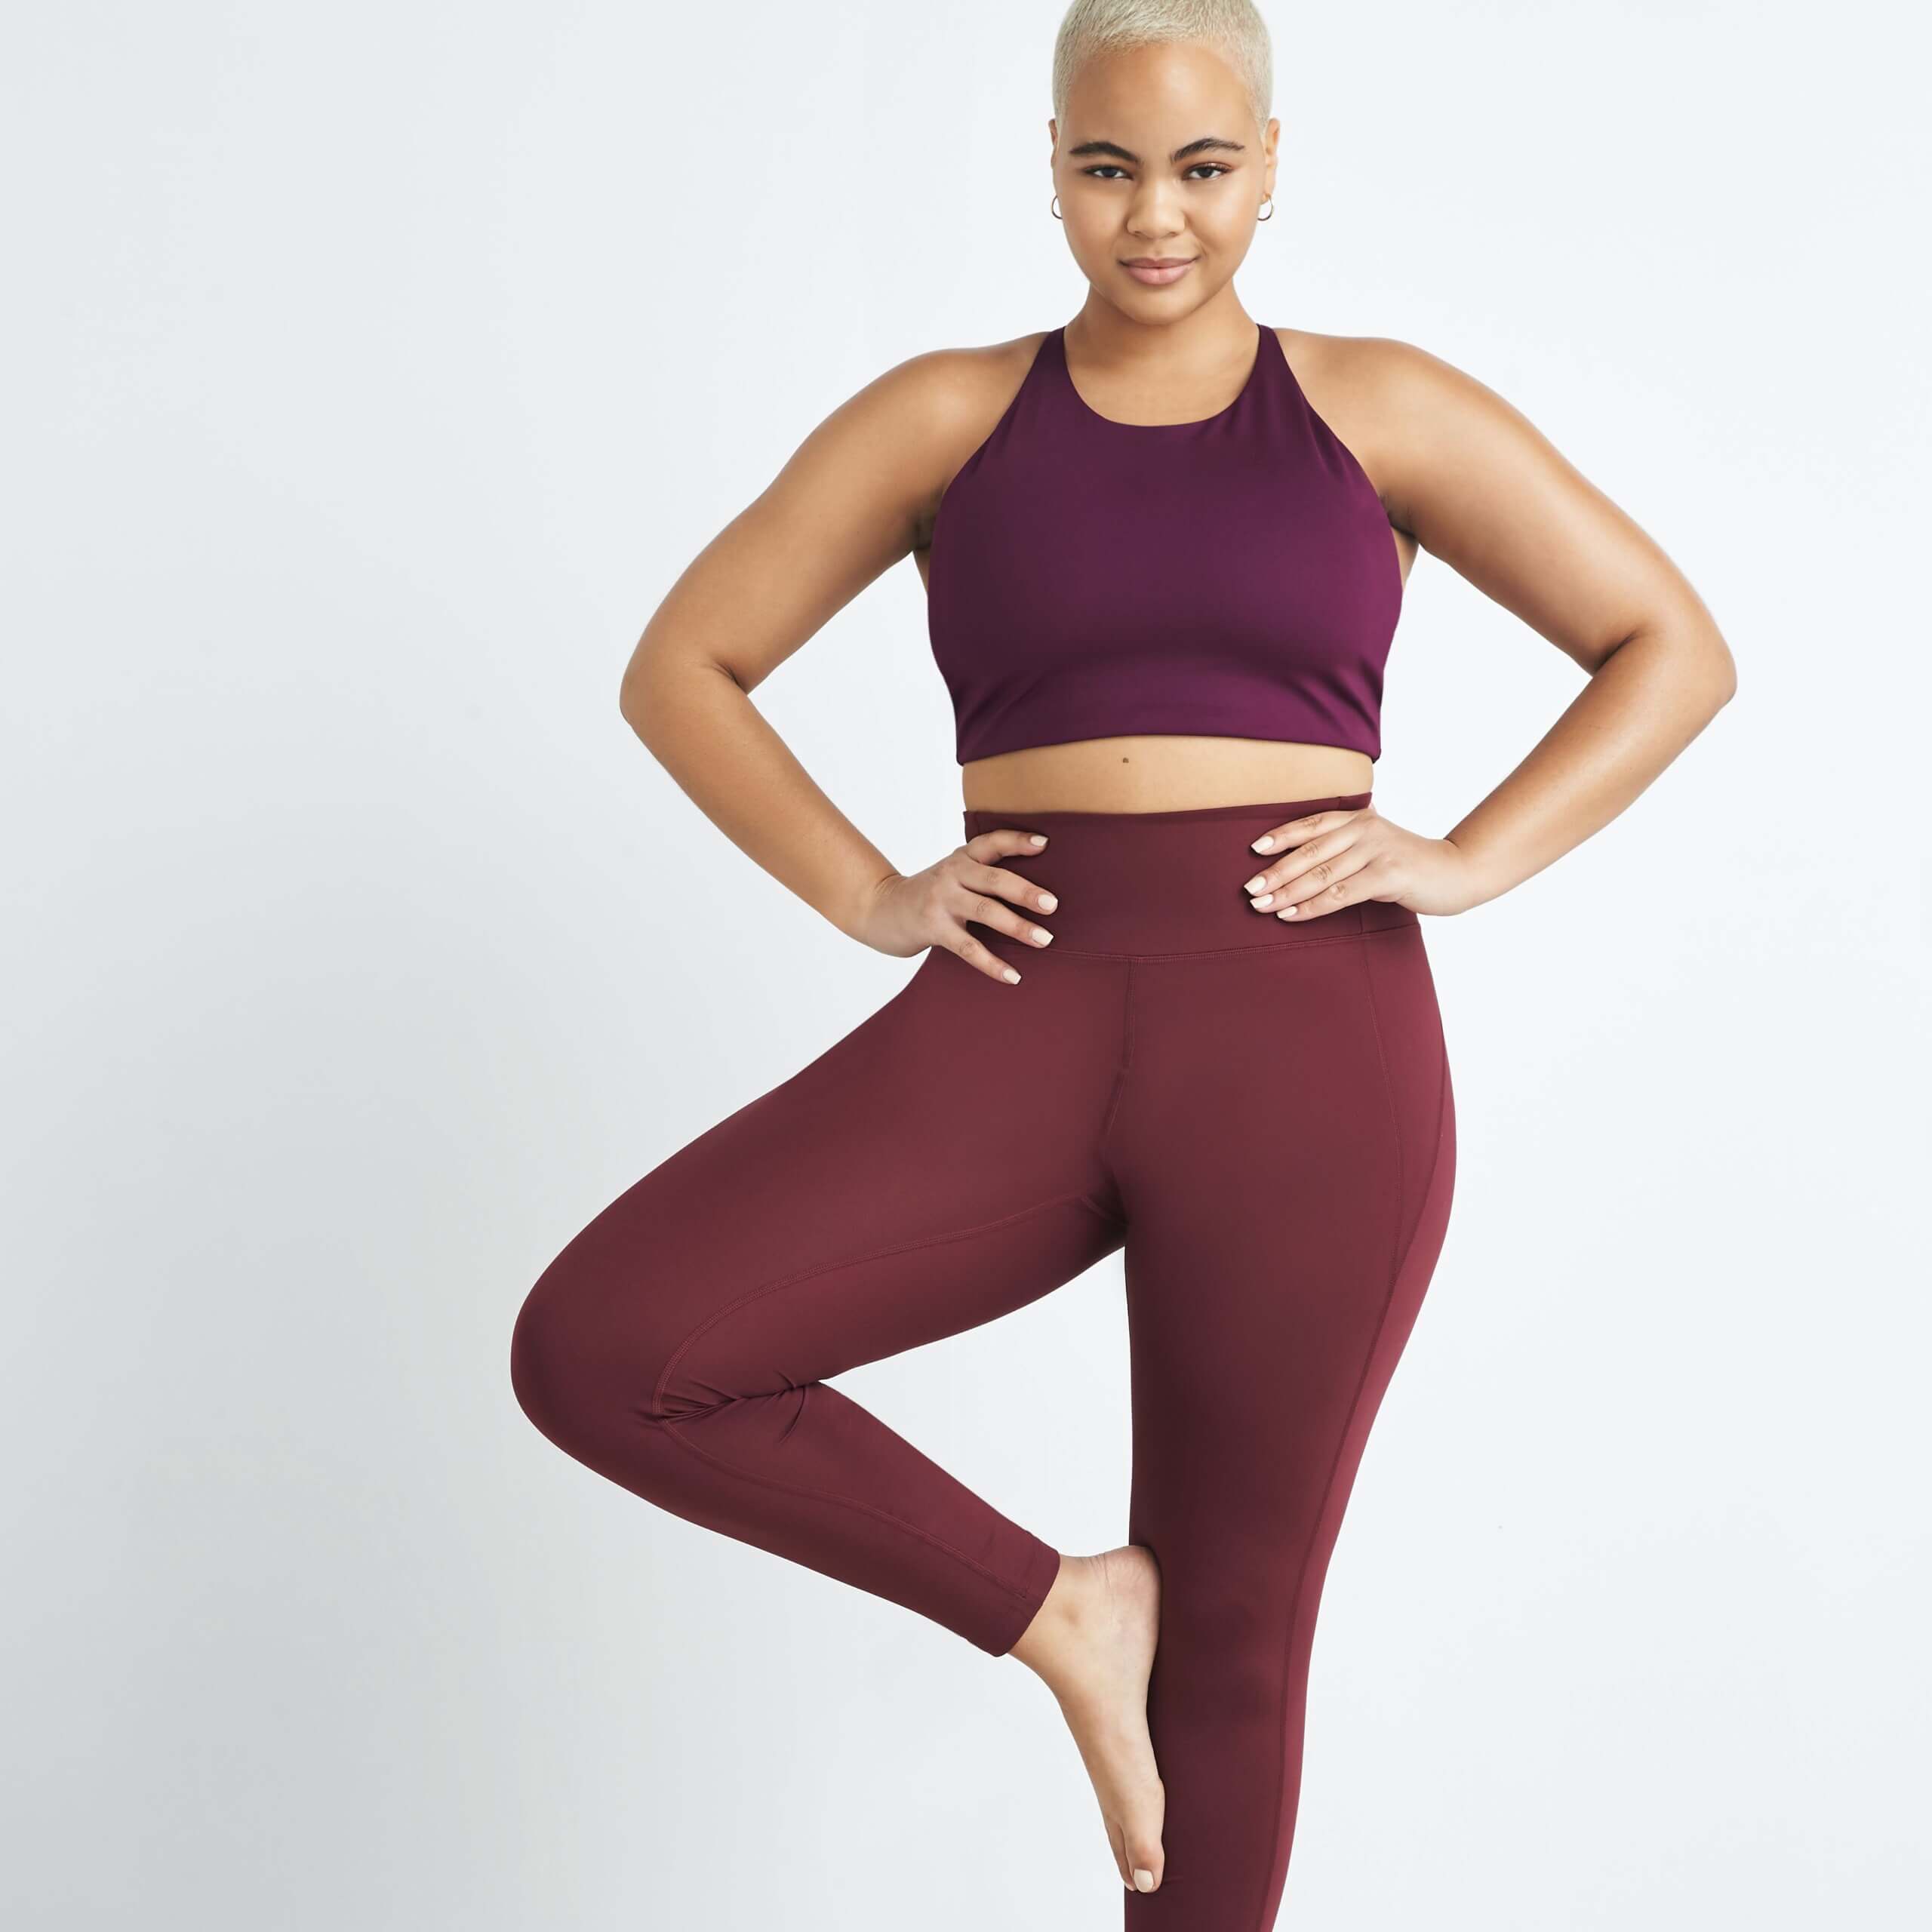 What to Wear to Yoga